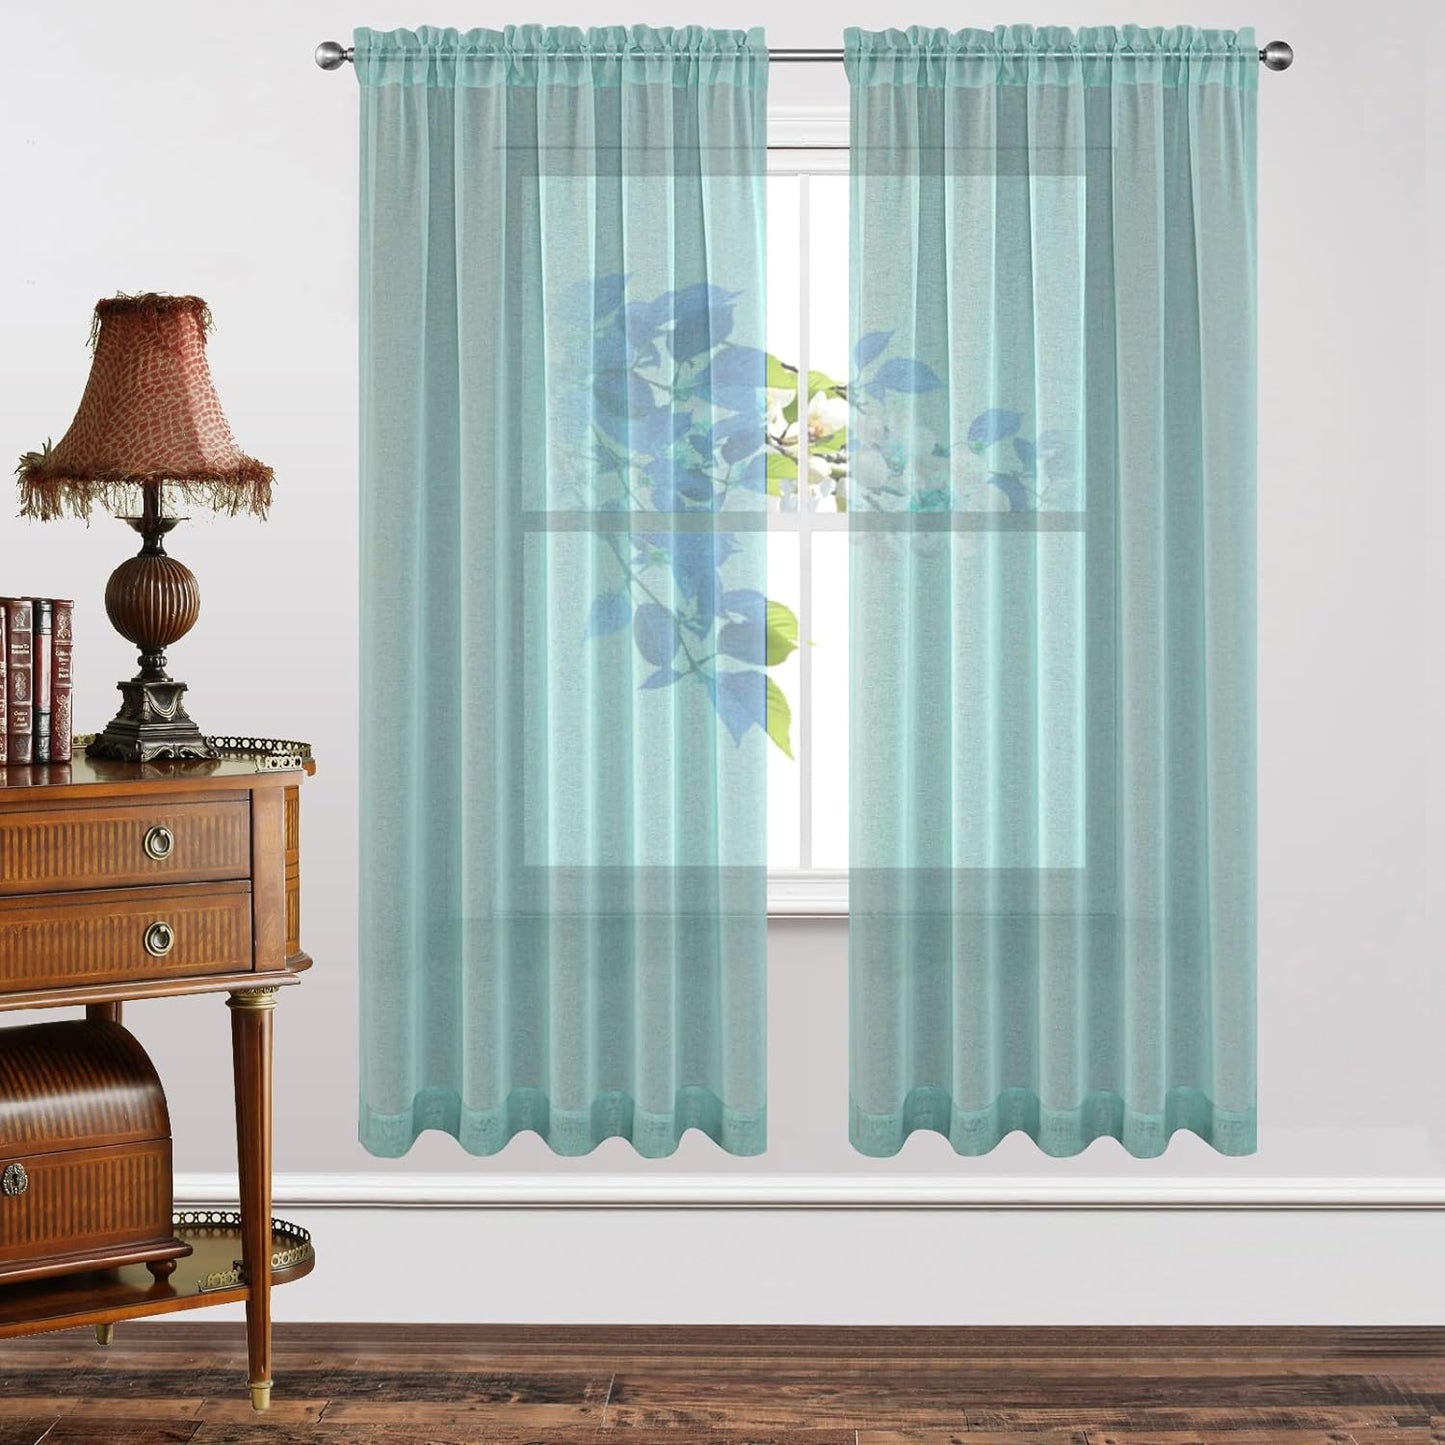 Joydeco White Sheer Curtains 63 Inch Length 2 Panels Set, Rod Pocket Long Sheer Curtains for Window Bedroom Living Room, Lightweight Semi Drape Panels for Yard Patio (54X63 Inch, off White)  Joydeco Teal Blue 54W X 72L Inch X 2 Panels 